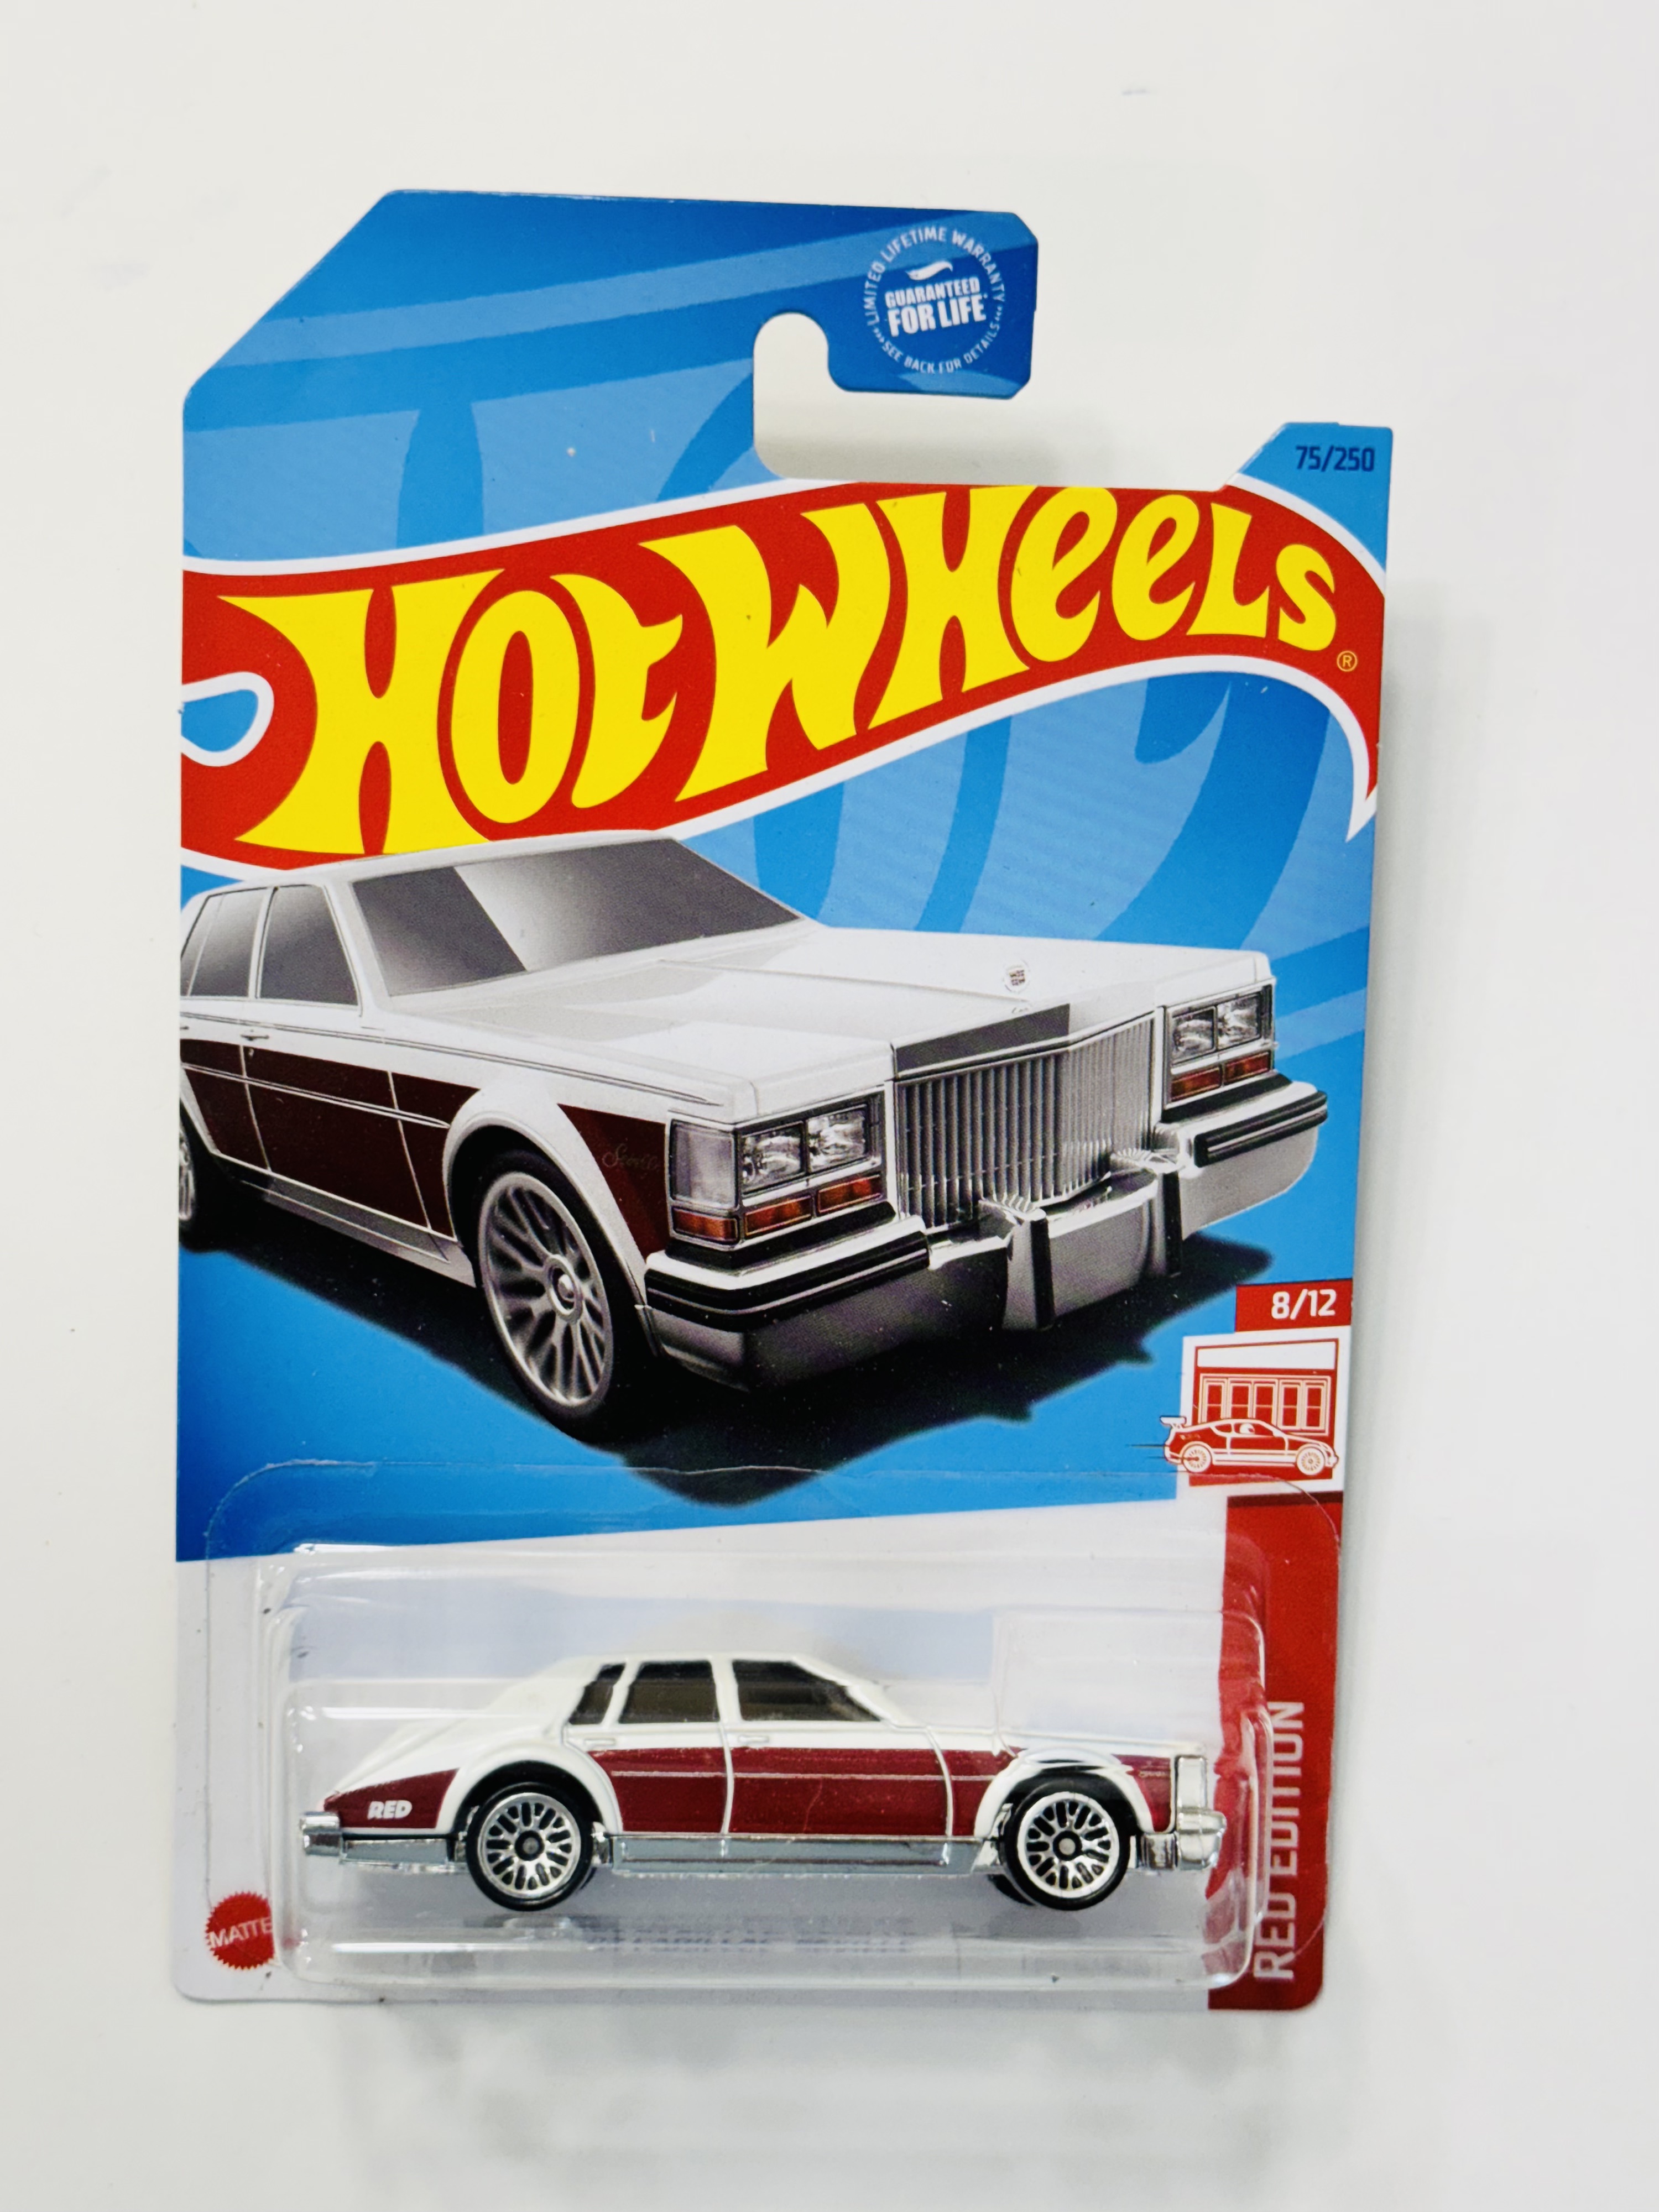 Hot Wheels #75 '82 Cadillac Seville - Exclusive Target Red Edition